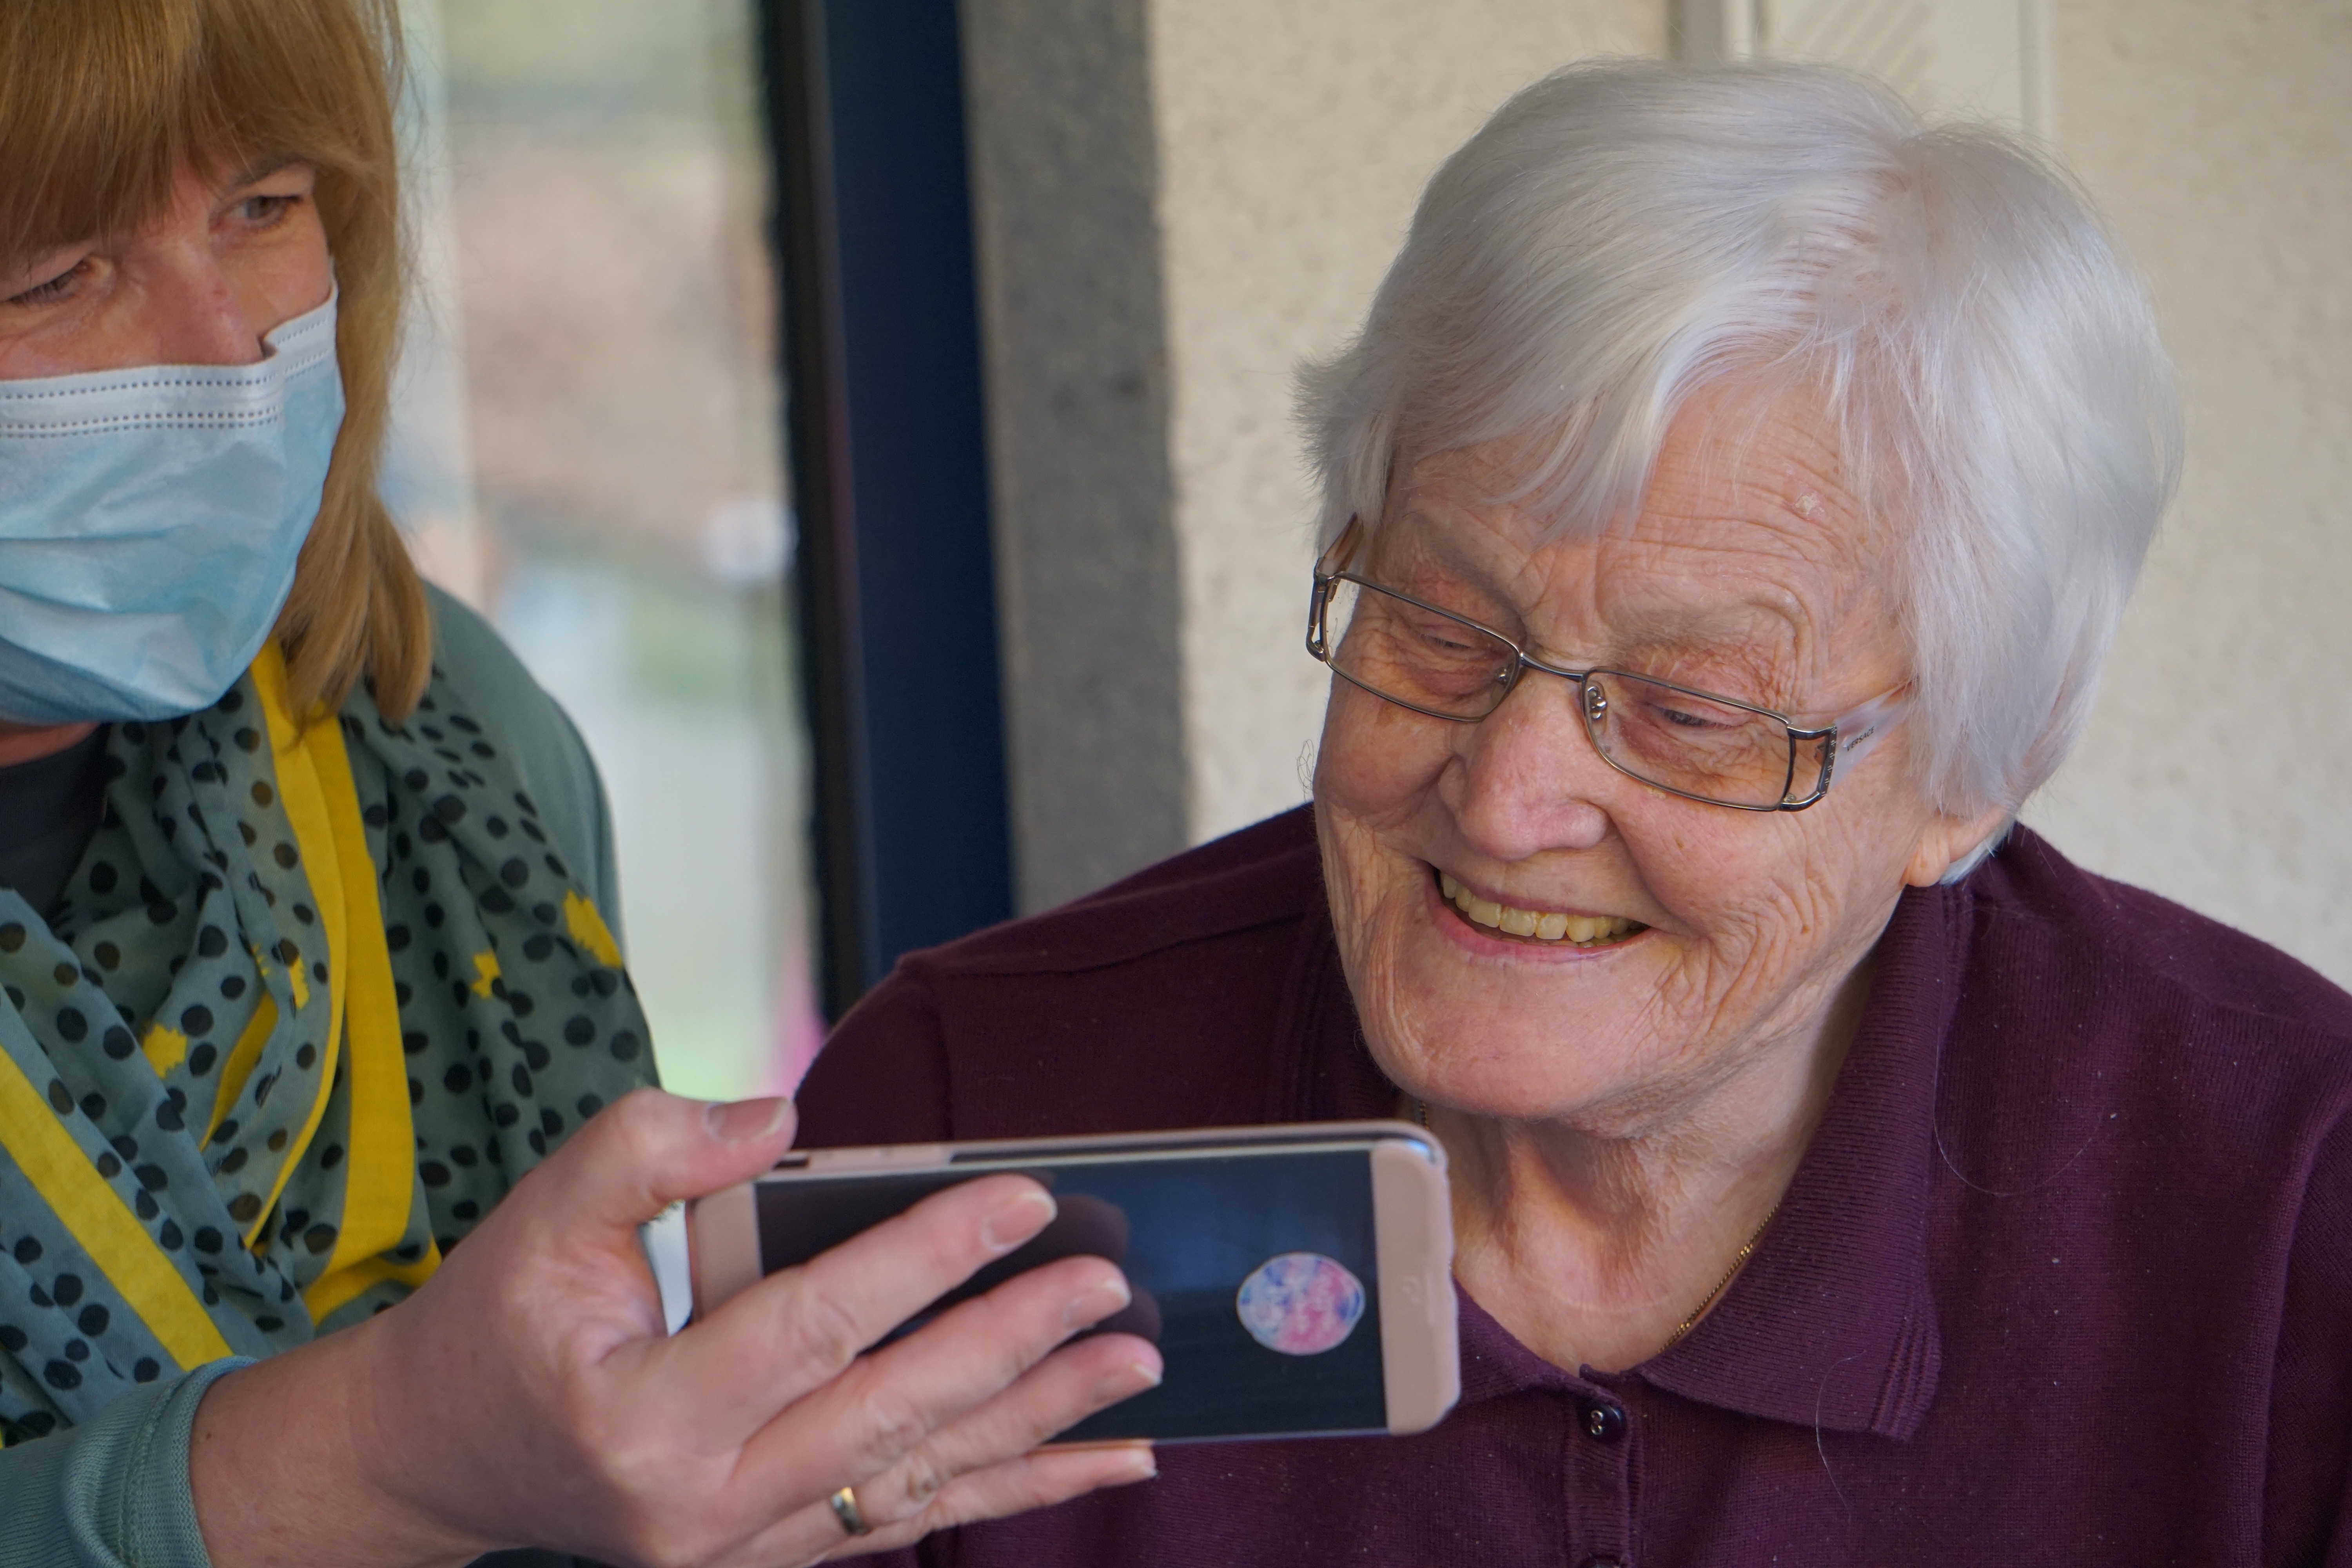 Aged care nurse with elderly person using a smartphone